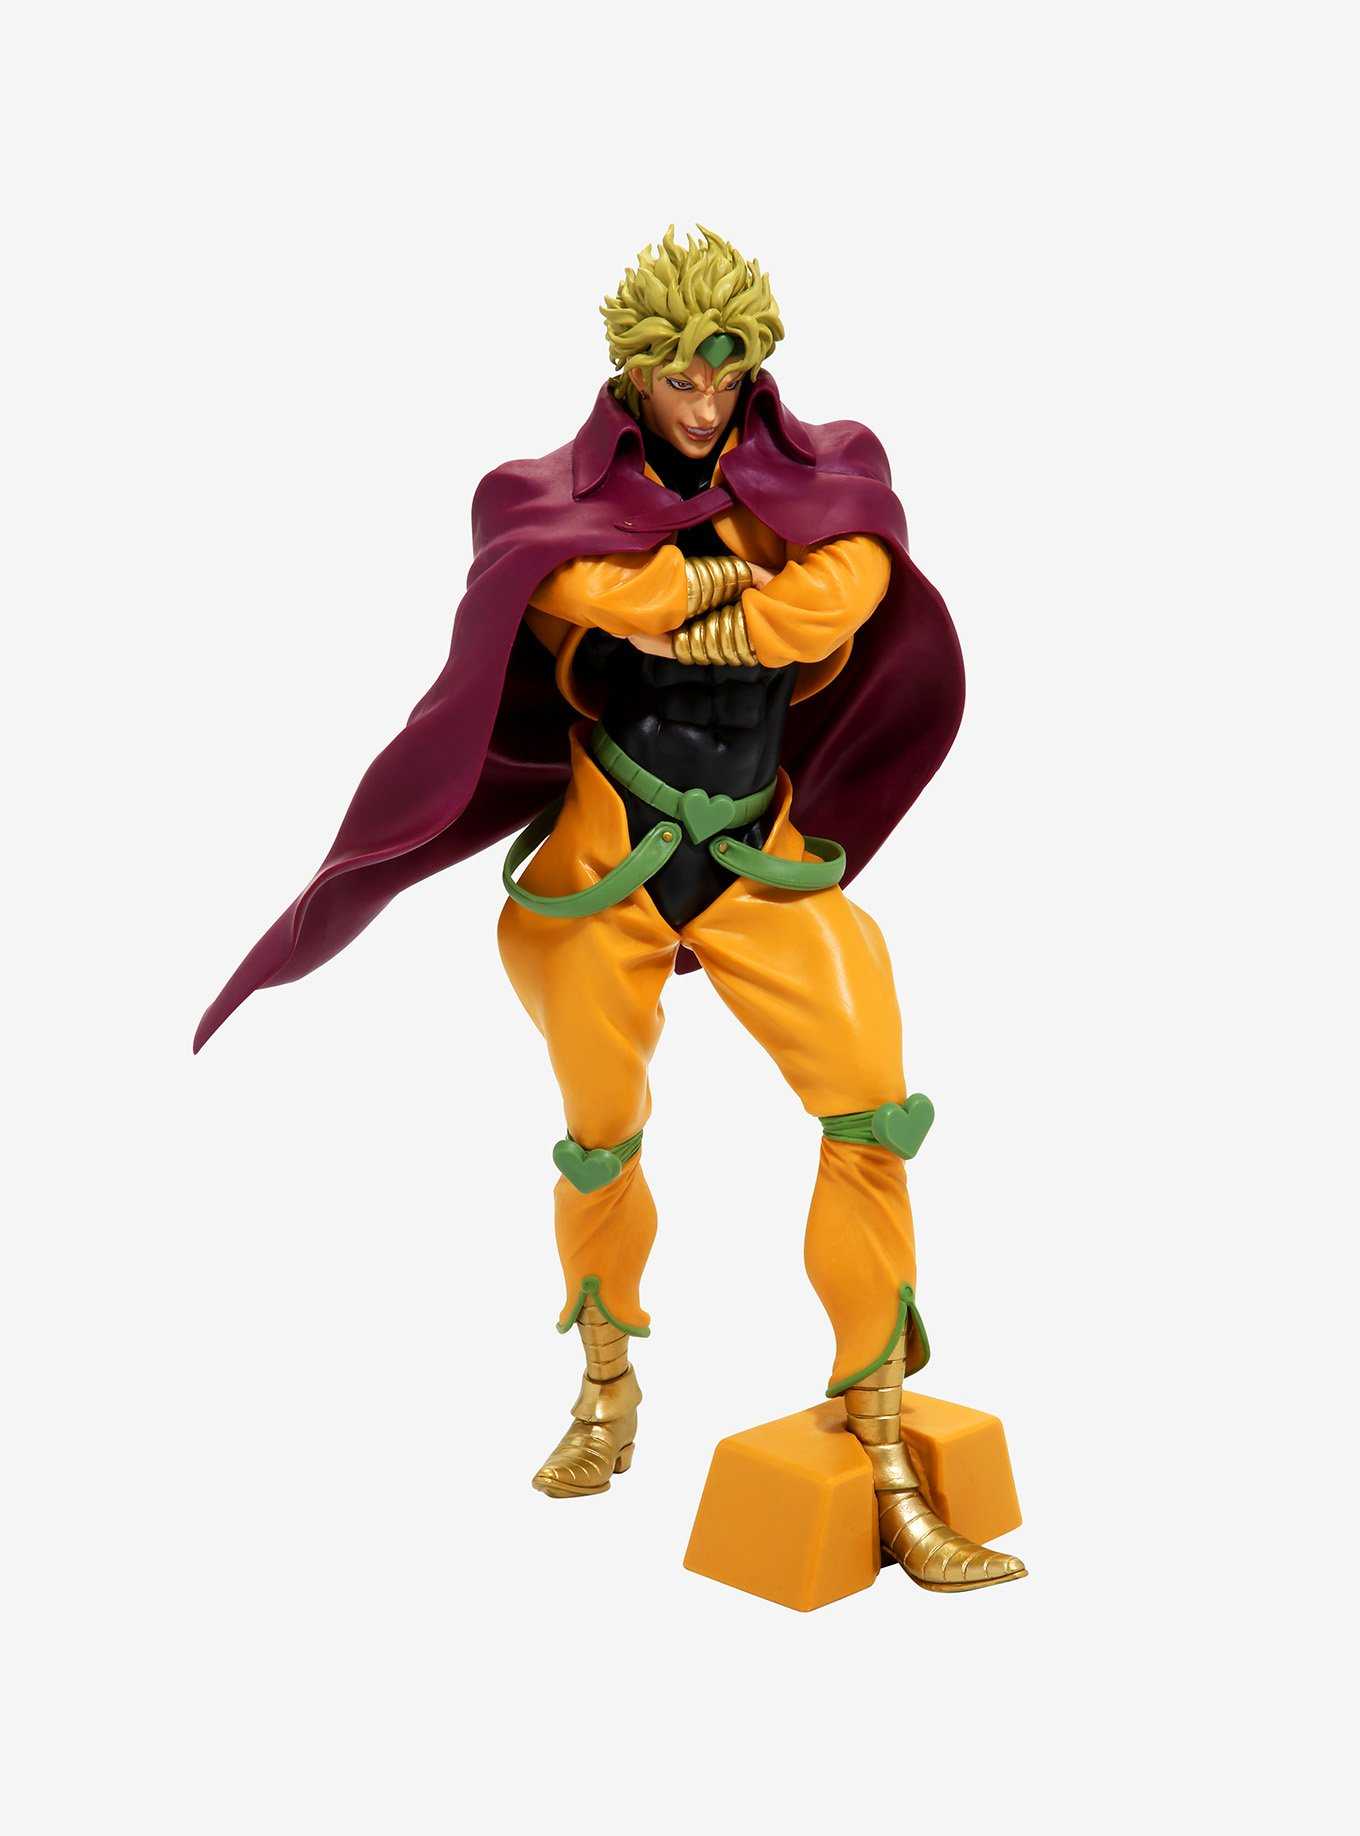 oh yeah, DIO hair is a thing now